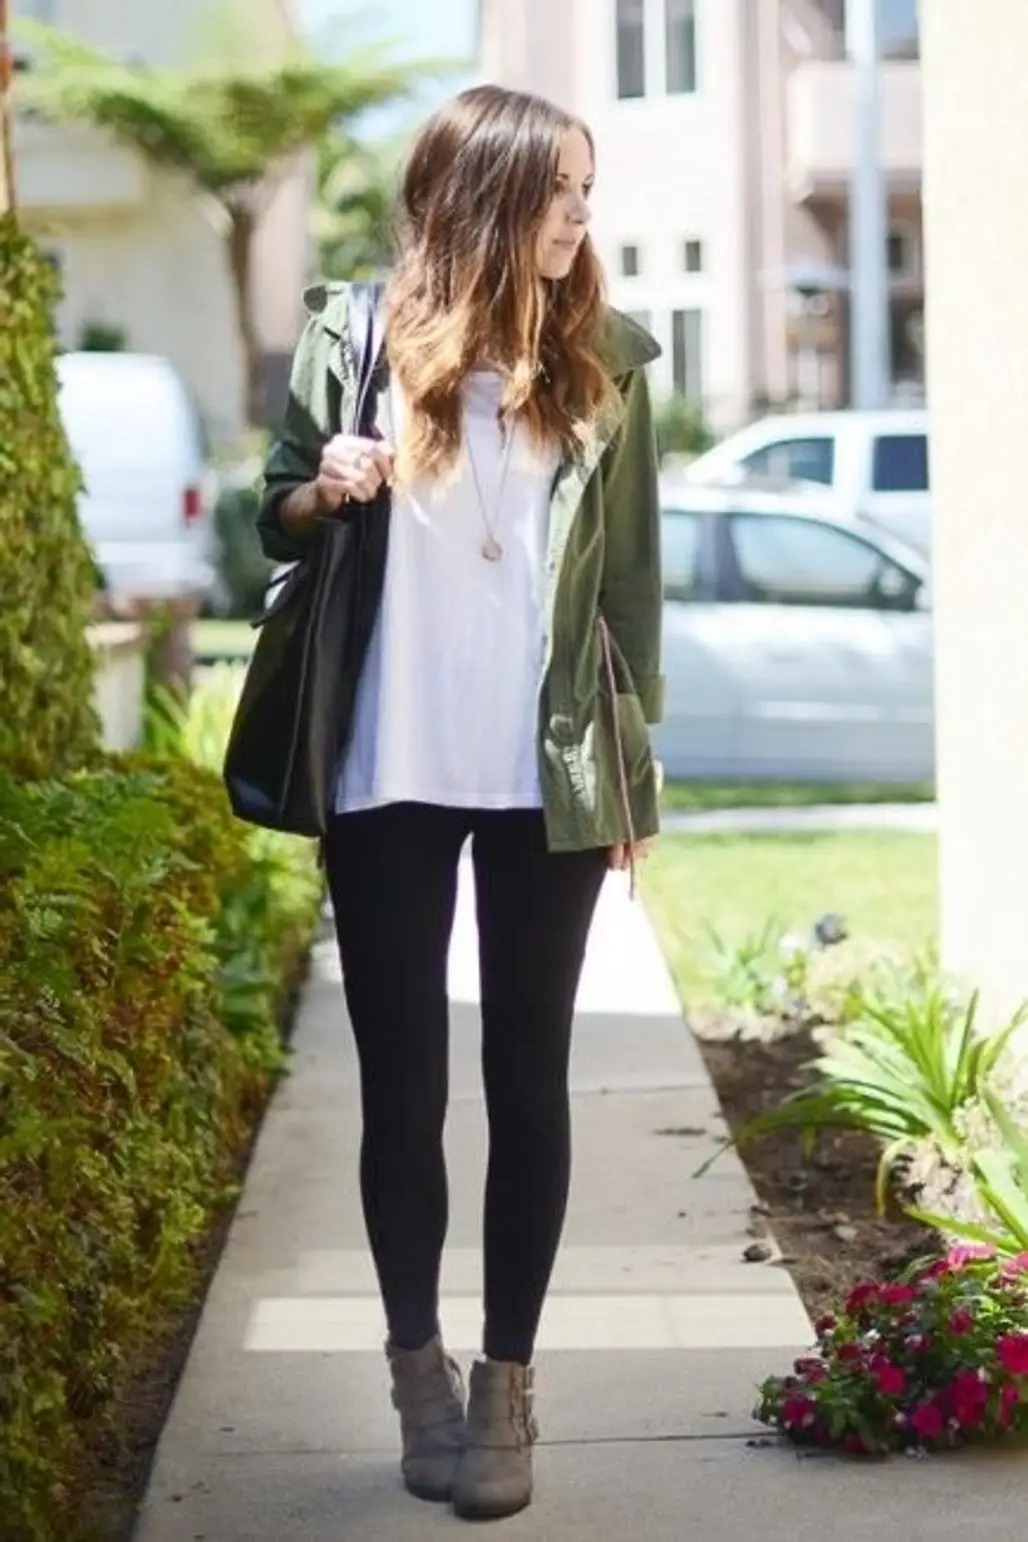 Leggings and a Military Jacket